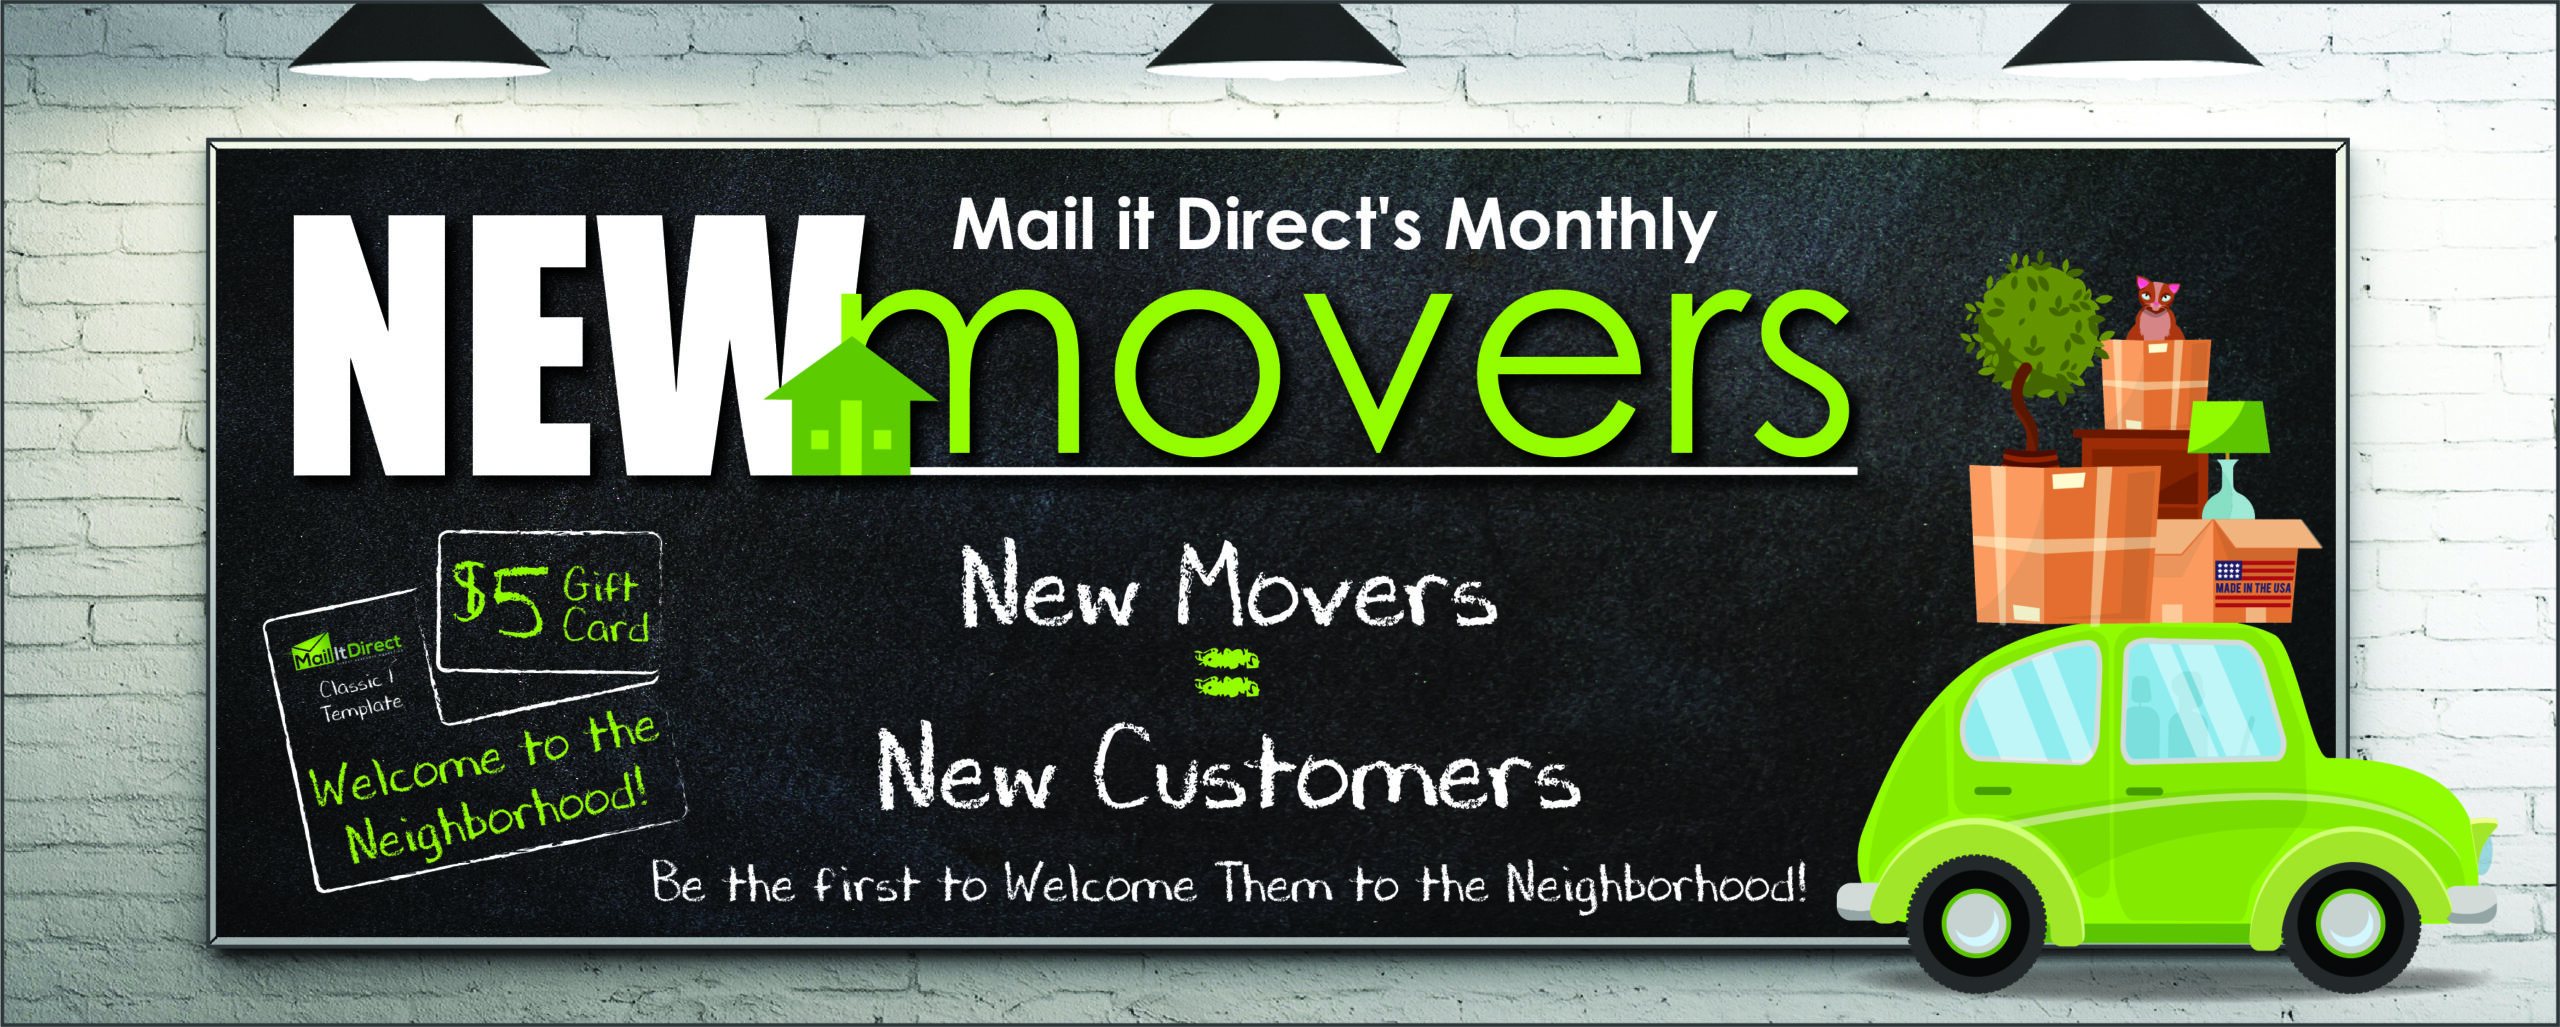 Website_Slides_NewMovers-scaled